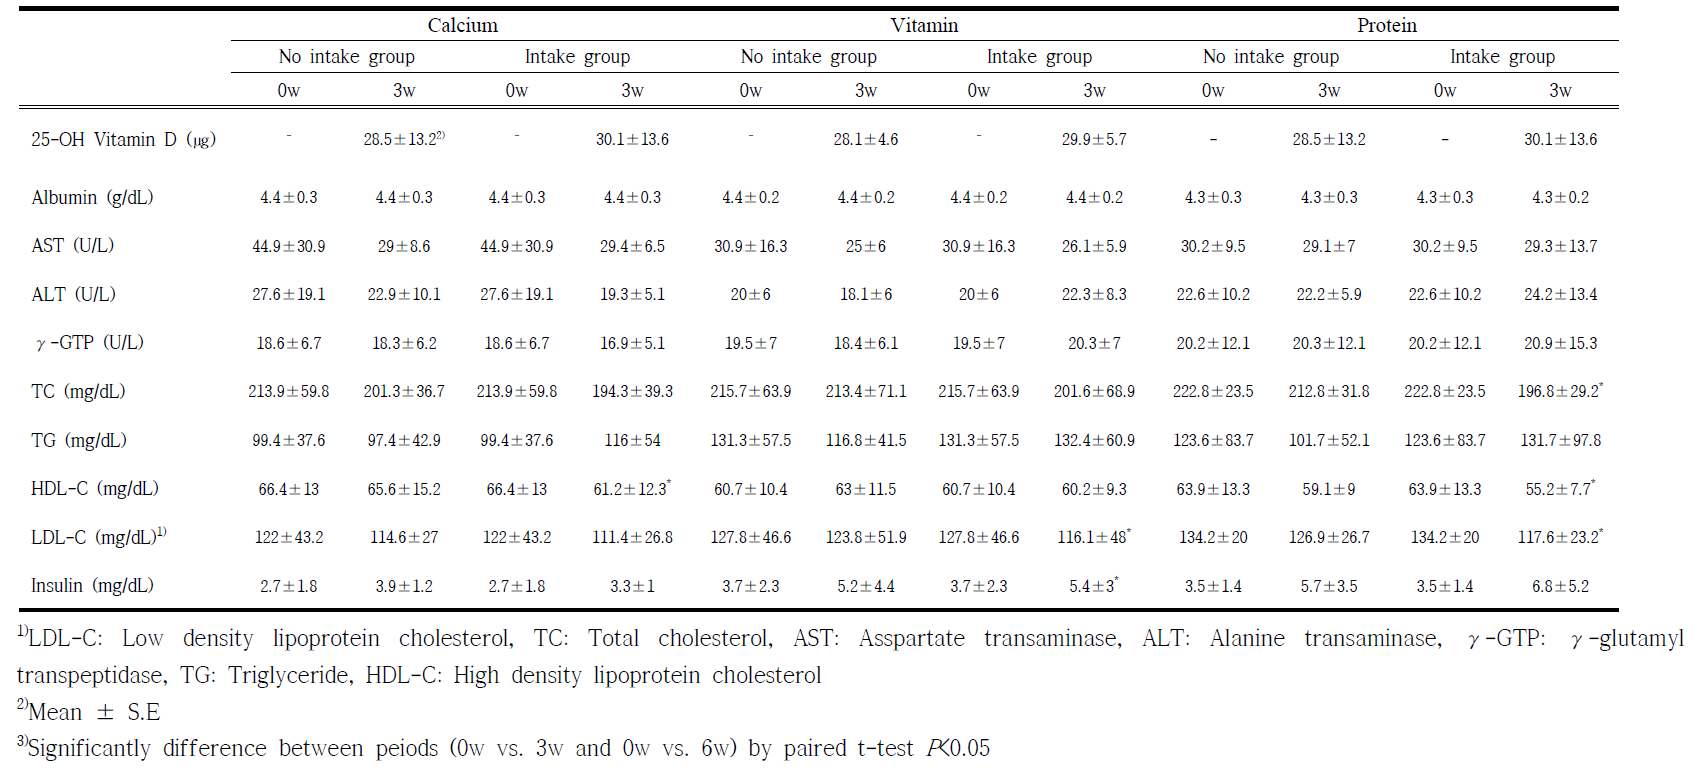 Biochemical analysis of participants at baseline and 3 weeks post supplementation